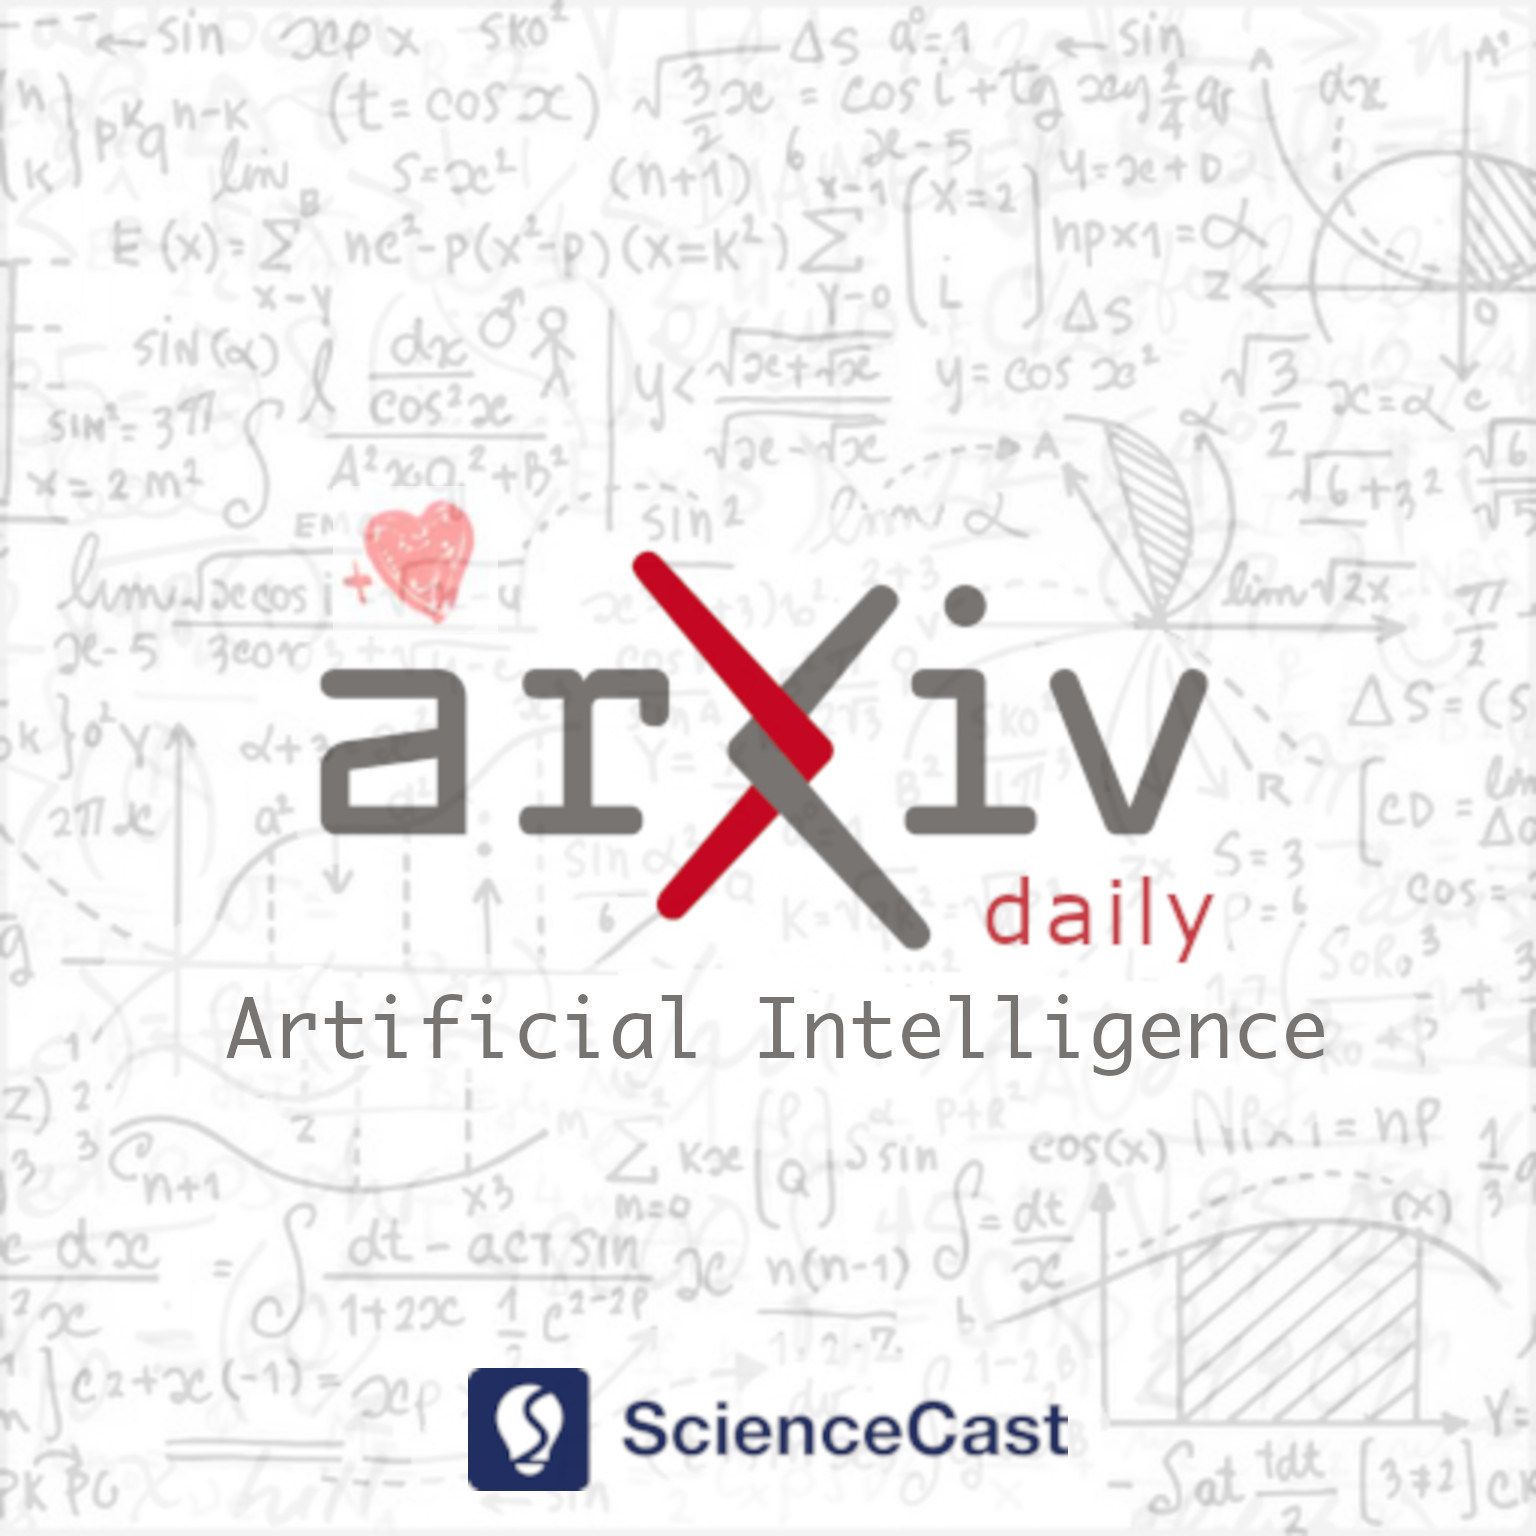 arXiv daily: Artificial Intelligence